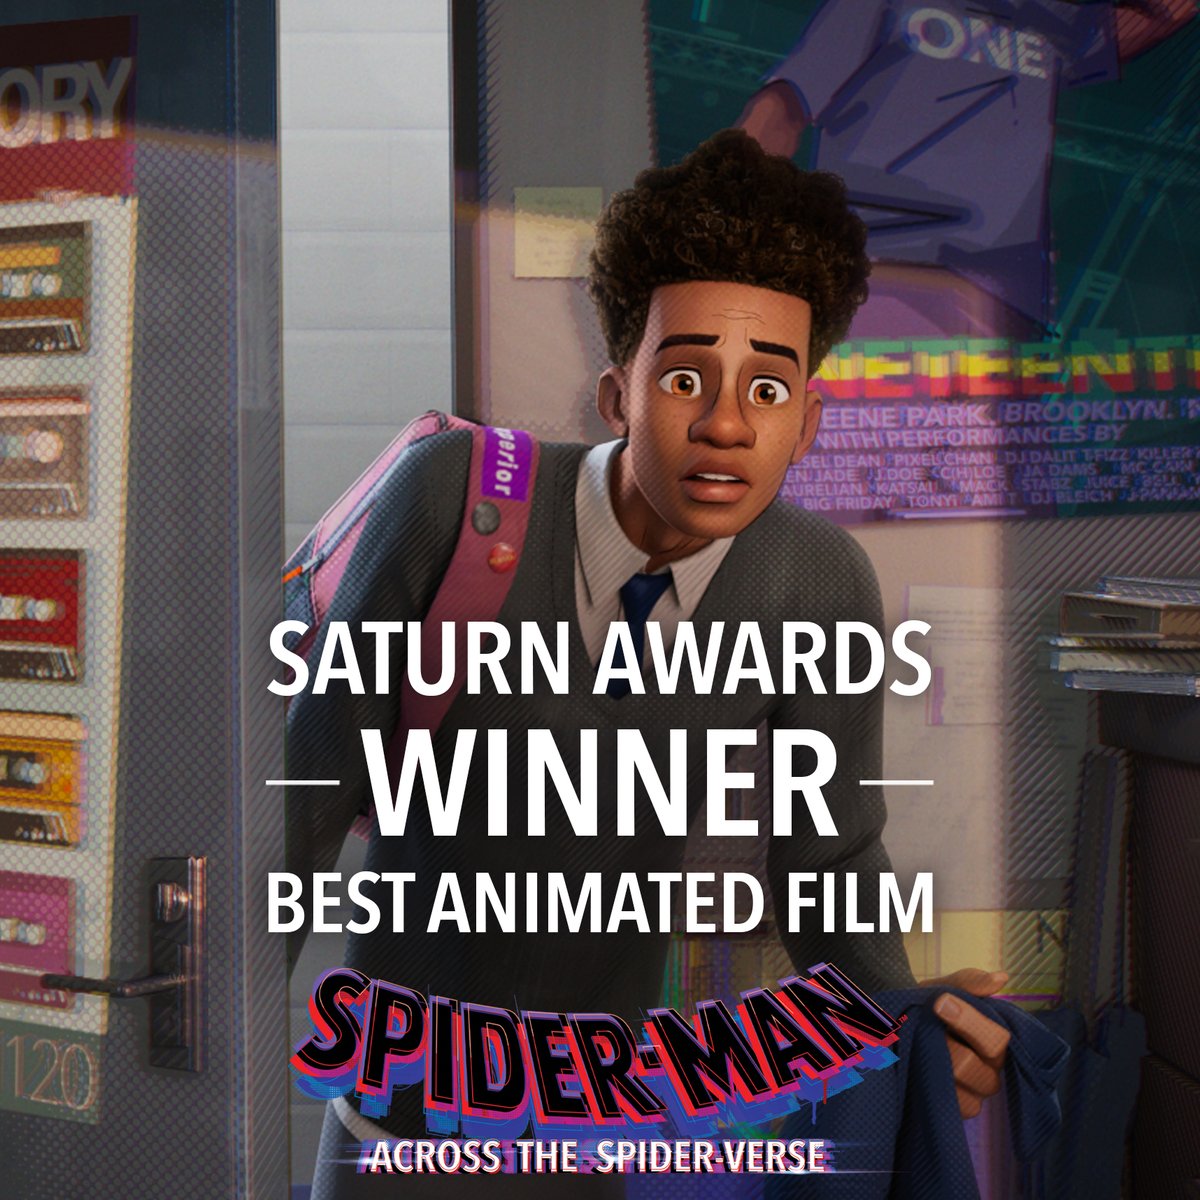 Spider-Man: Across the #SpiderVerse is the #SaturnAwards winner for Best Animated Feature. 💫